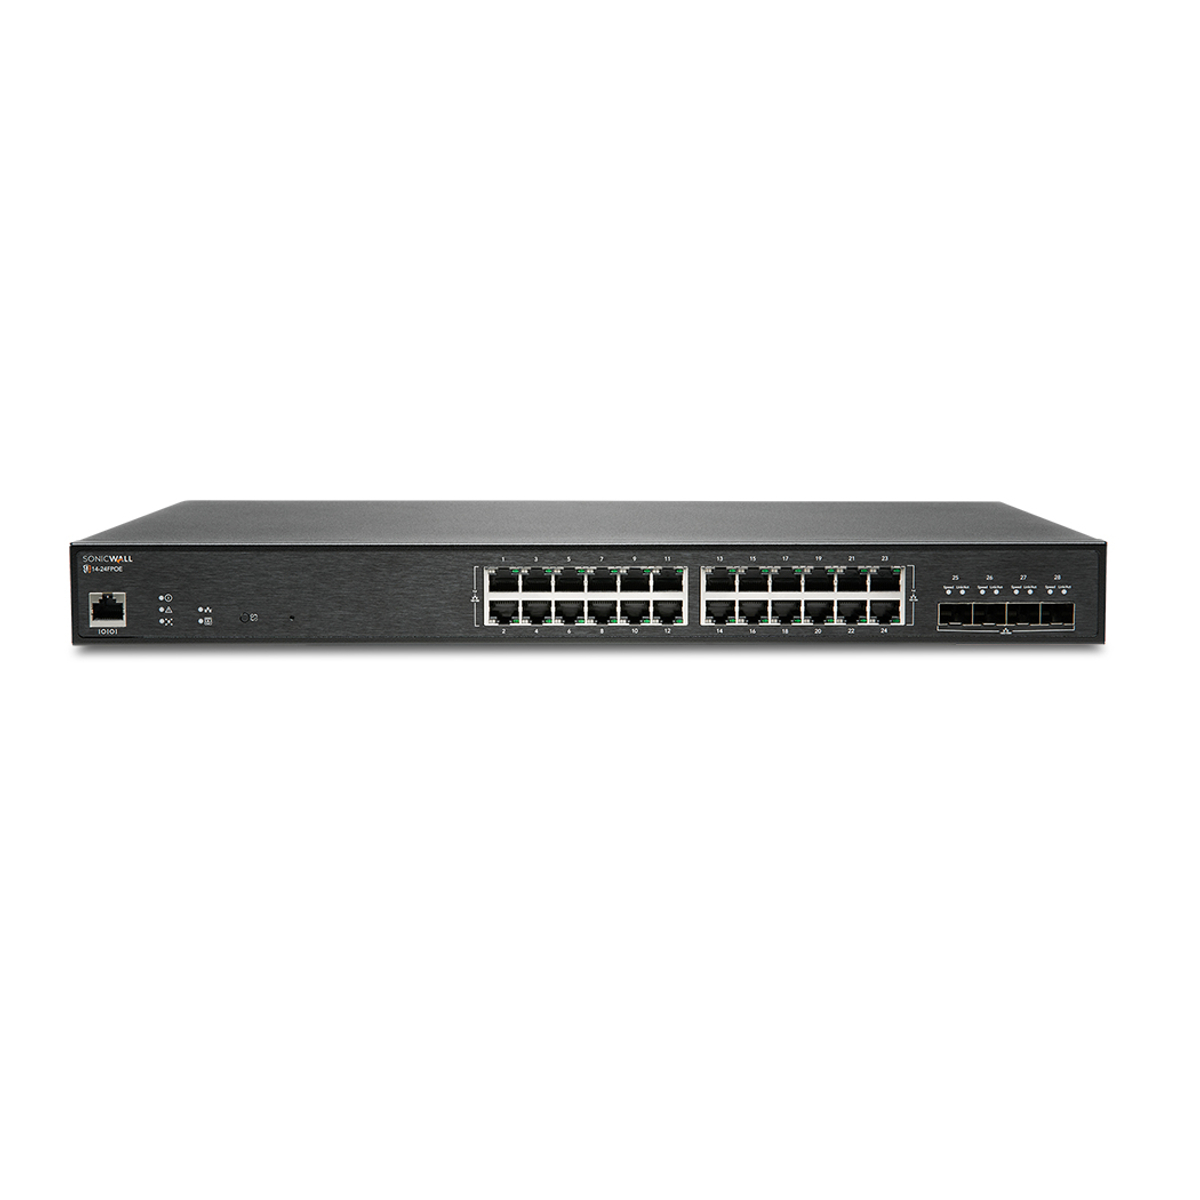 SWITCH SWS14-24FPOE WITH SUPPORT 1YR